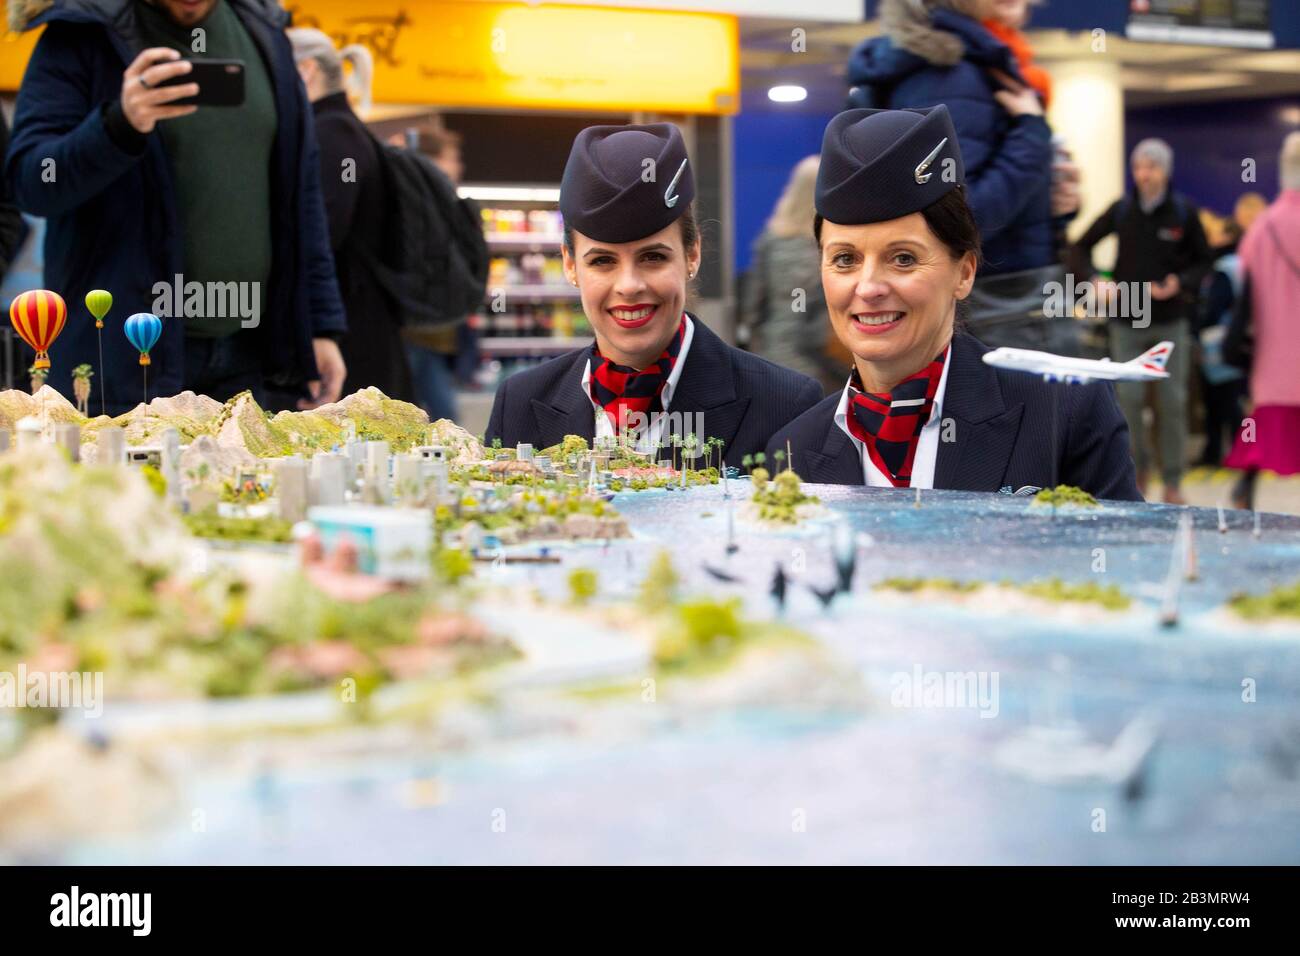 British Airways cabin crew Olivia Welch (left) and Julie Diggins with a 20-by-20-foot model of California at Visit California's 'Minifornia: An Epic Road Trip Experience' at Waterloo Station, London. PA Photo. Picture date: Thursday March 5, 2020. The Minifornia experience, which is open until March 7, includes a convoy of miniature cars and RVs 'road-tripping' on four routes across the custom built model. Designed and built by Hollywood set builders, Minifornia captures footage of road-trip journeys transmitted live to users wearing video headsets and across large screens in Stock Photo